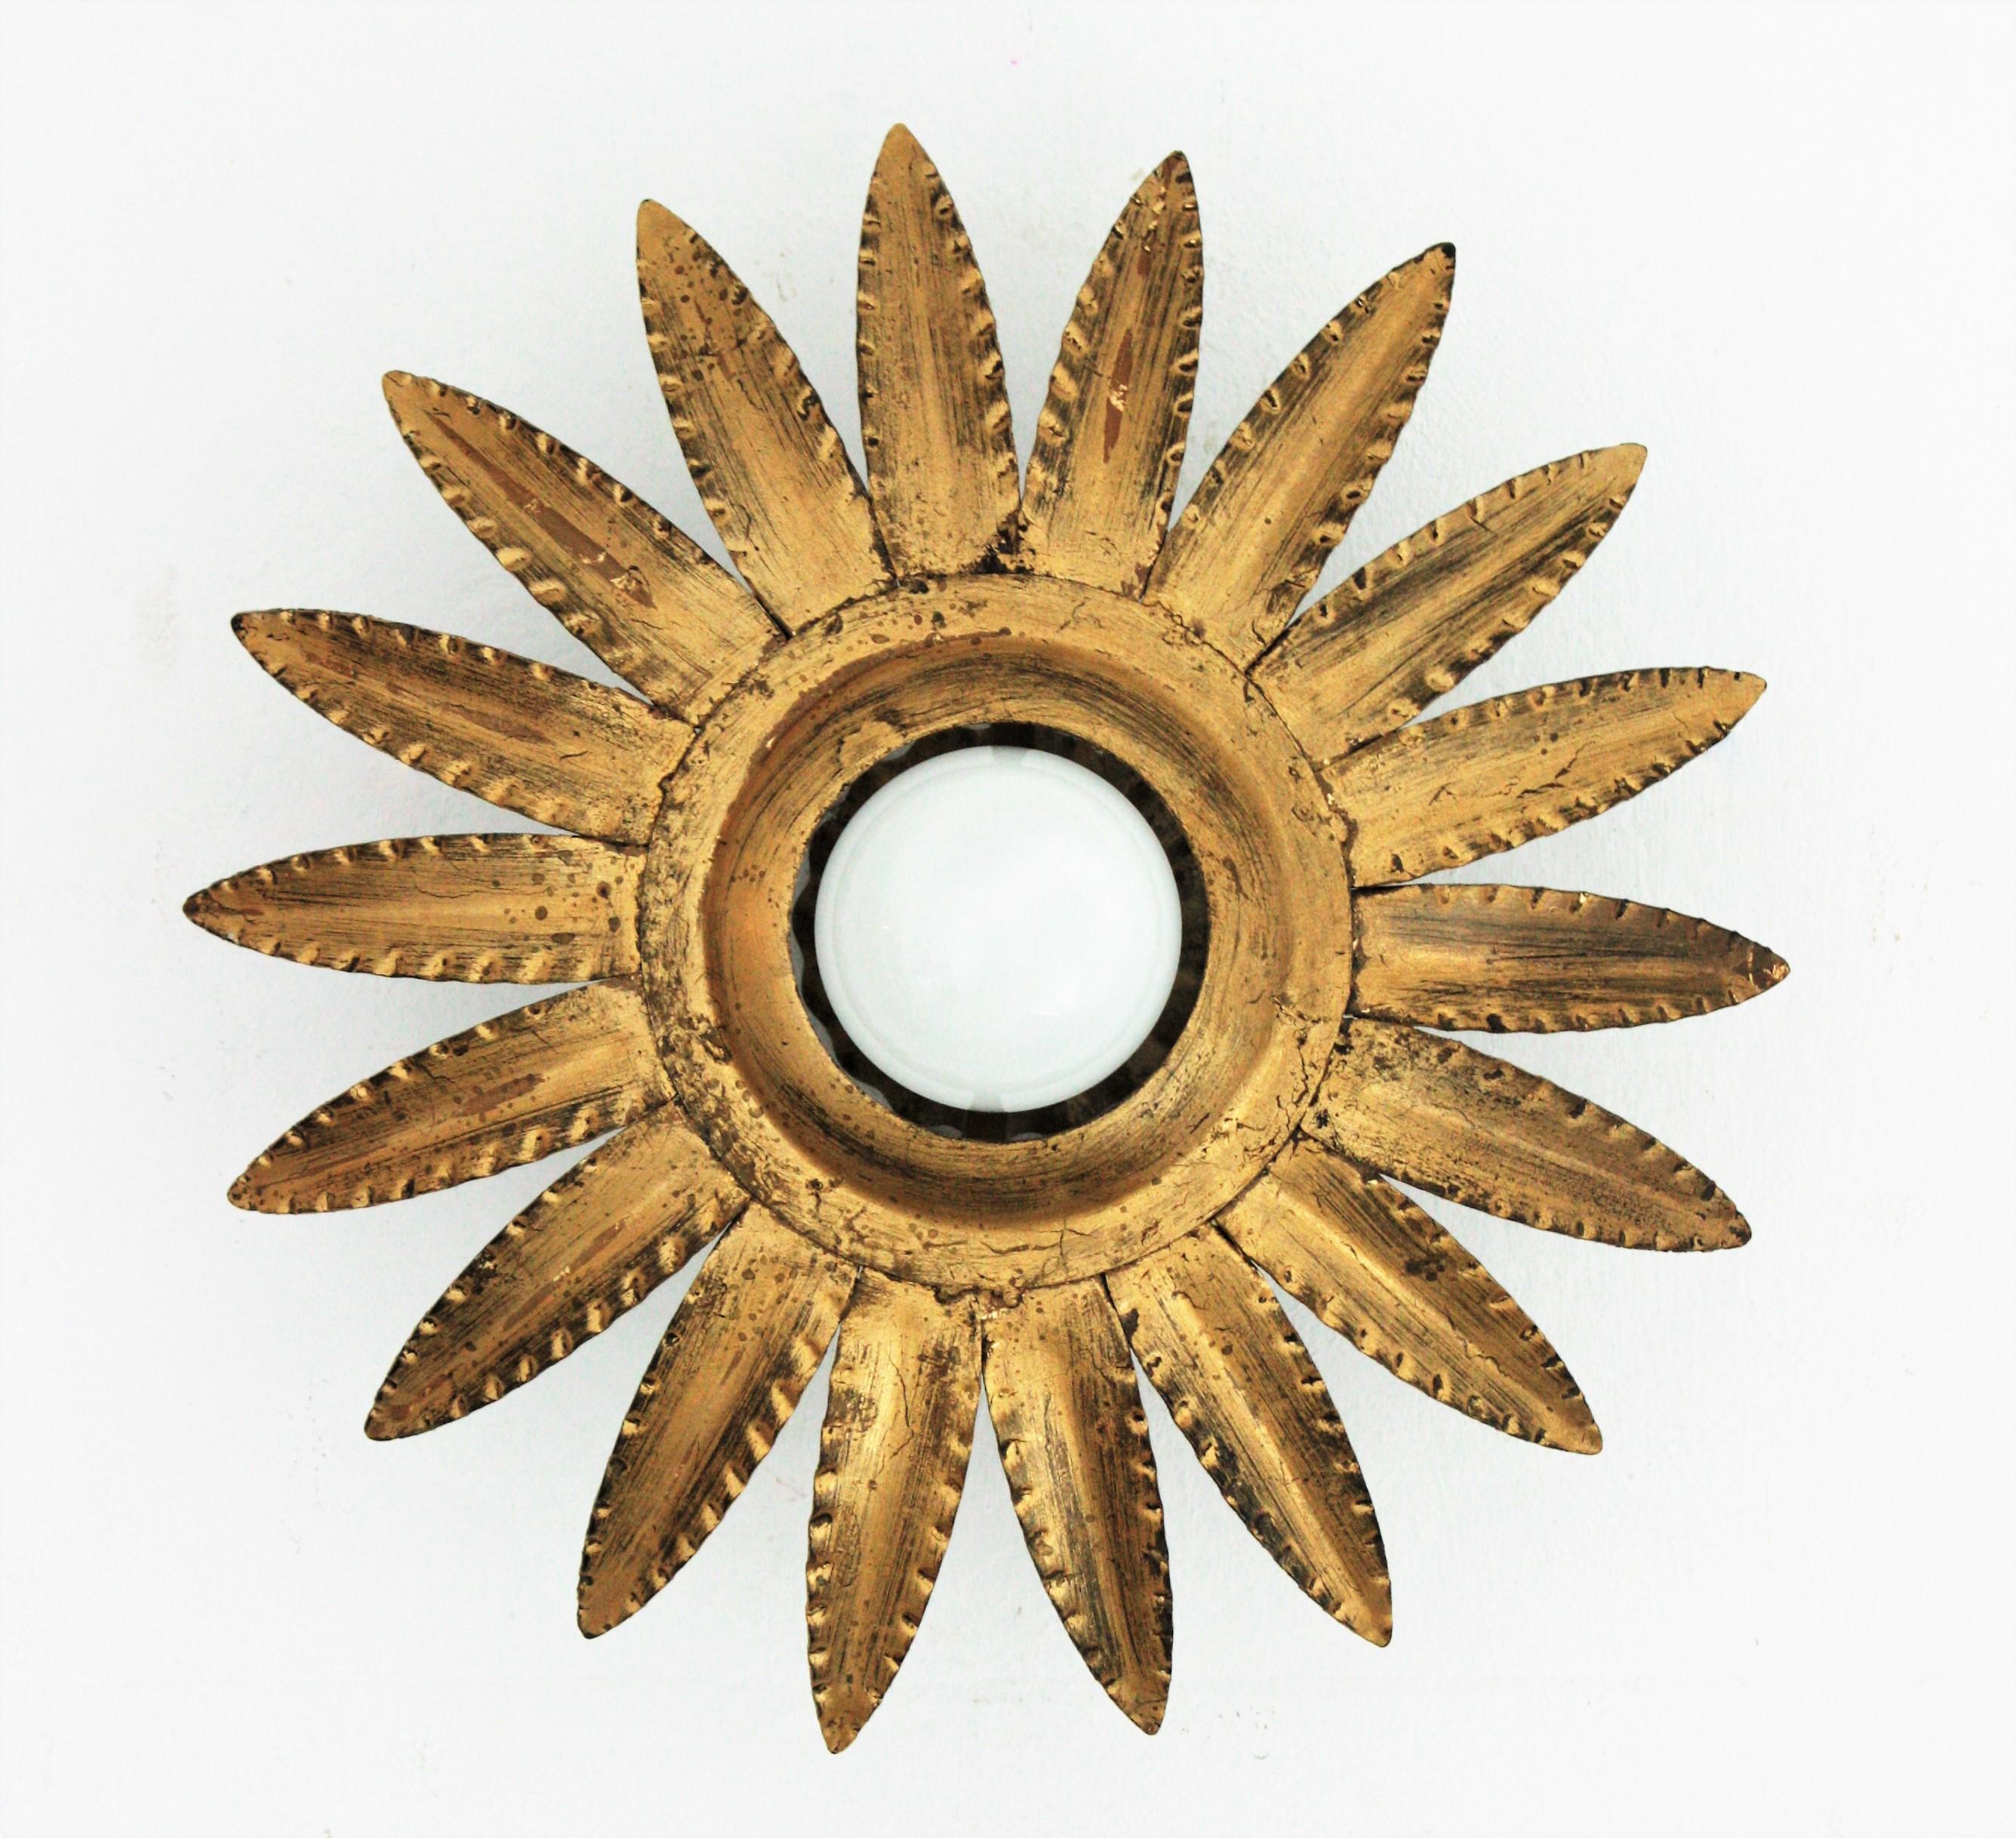 Eye-catching gilt wrought iron sunburst or flower shaped ceiling light fixture, wall sconce or pendant, Spain, 1960s.
A sunburst or flower shaped frame surrounds a central exposed bulb. It has gold leaf gilding and a terrific aged patina.
This